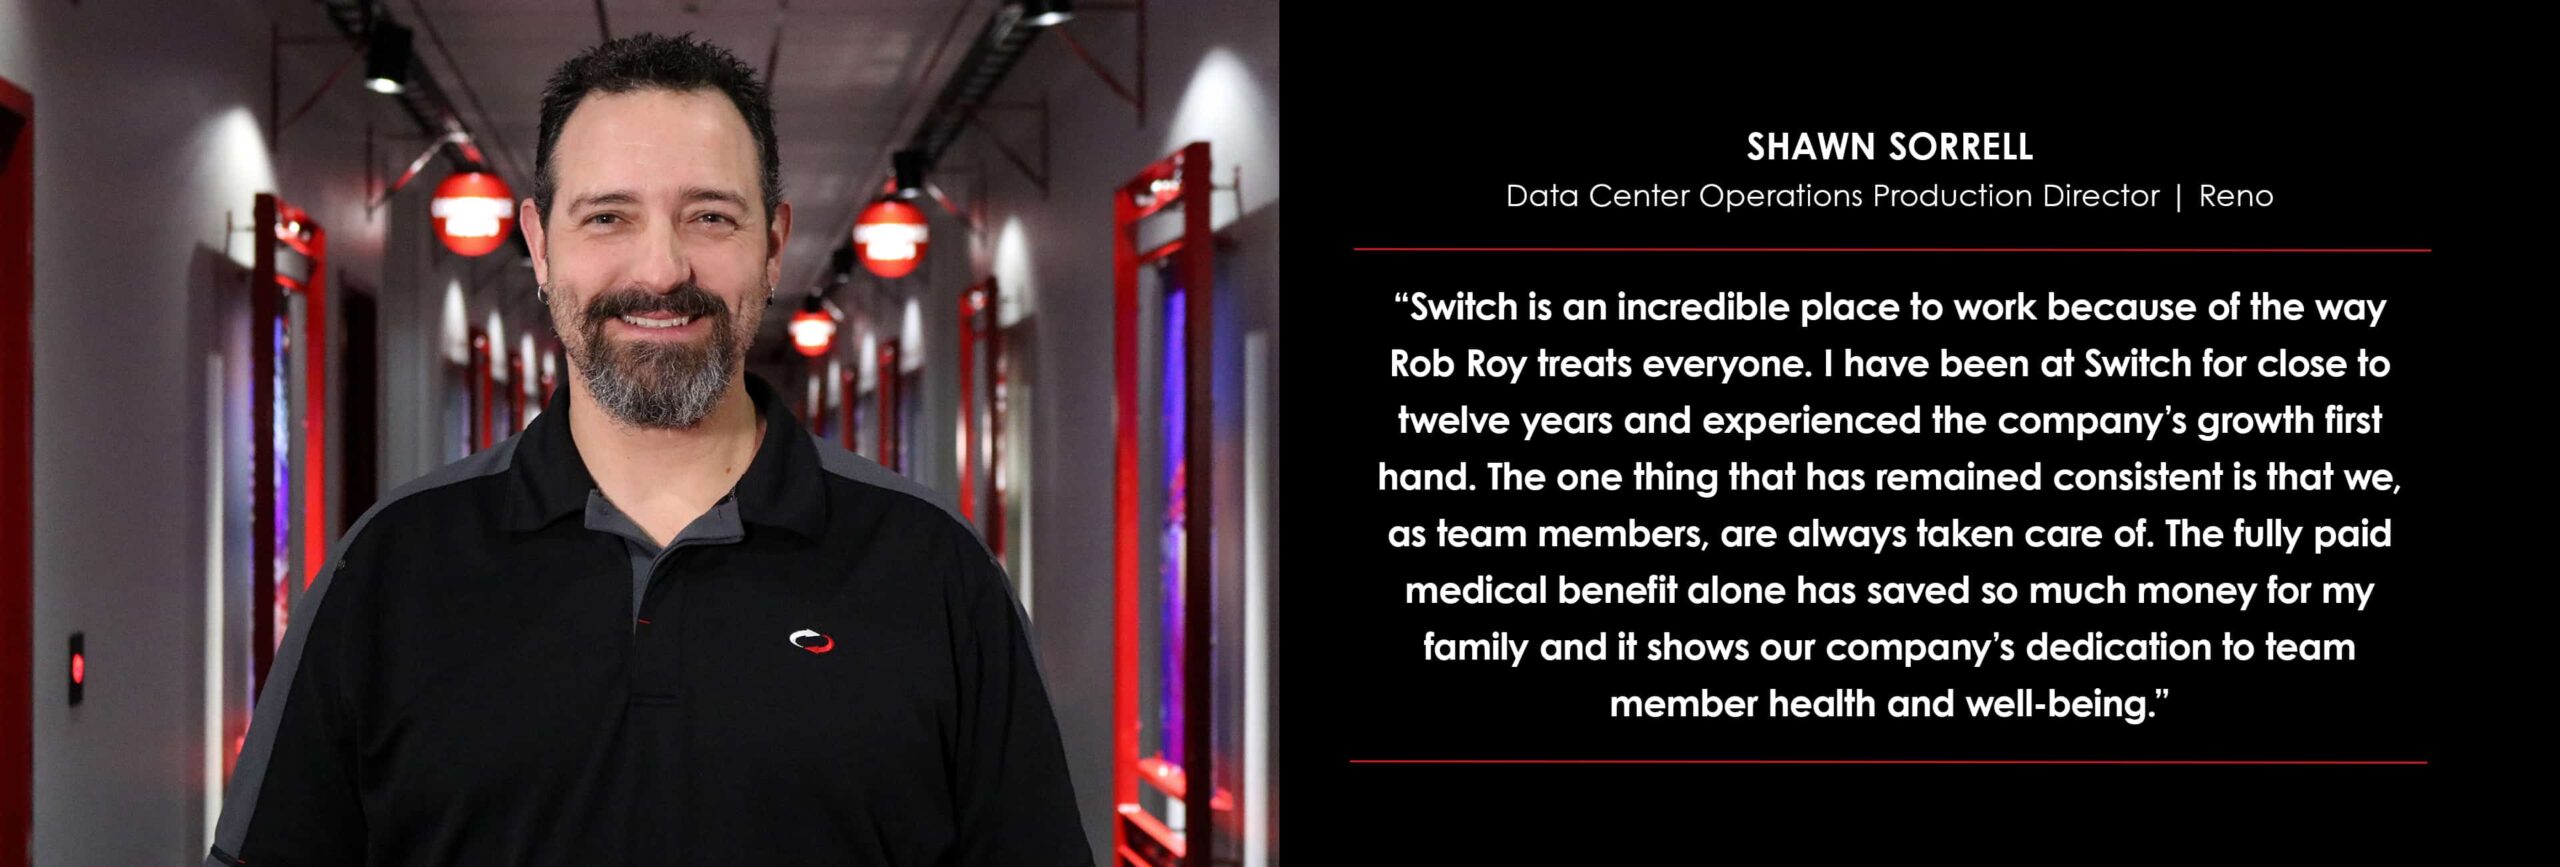 Shawn Sorrell | Data Center Operations Production Director Testimonial